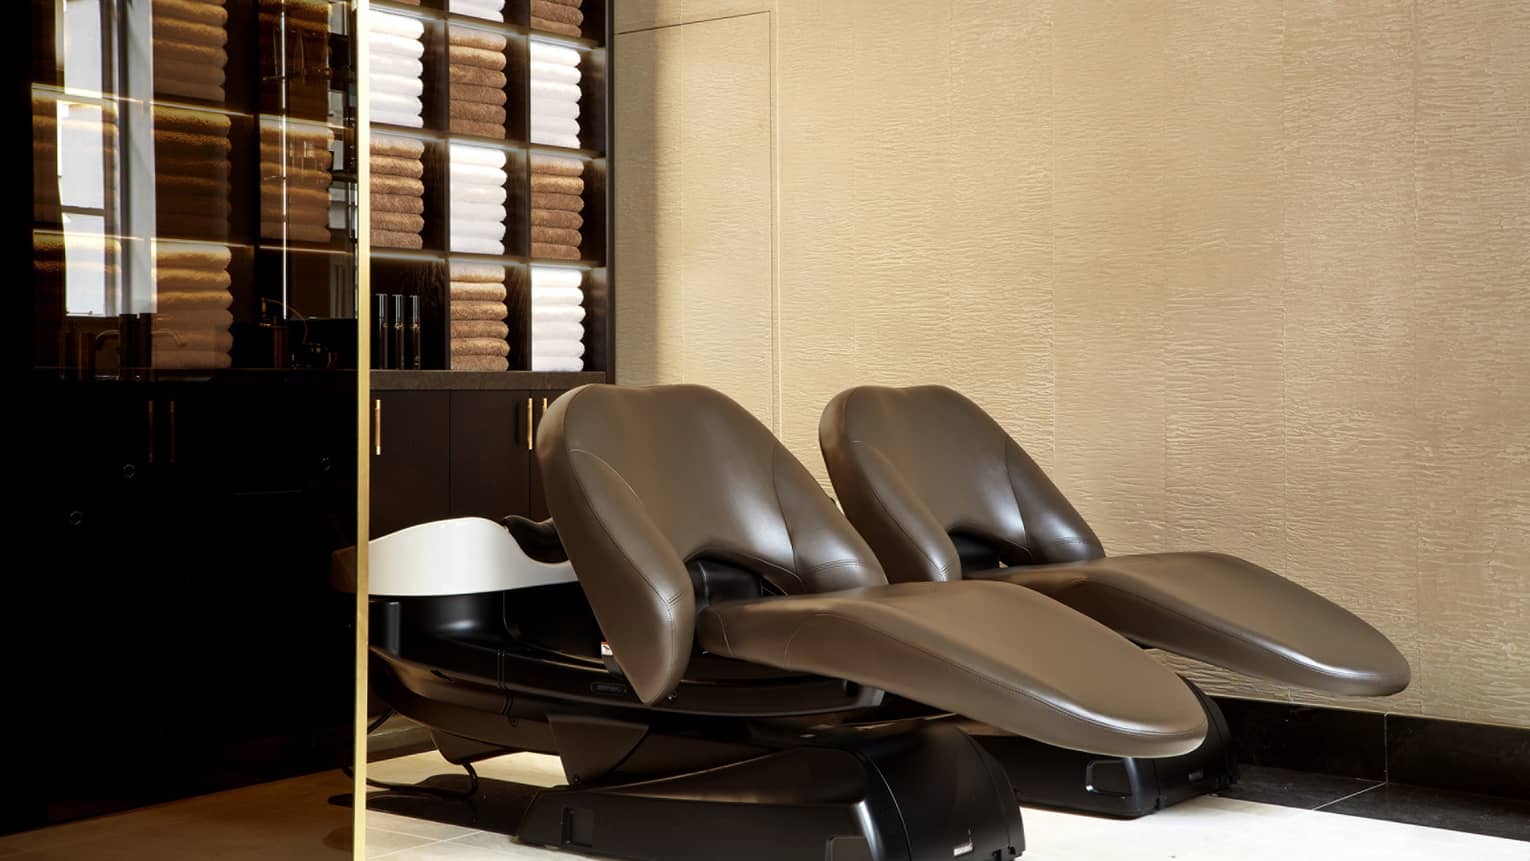 Gielly Green salon with warm-toned brown leather reclining chairs